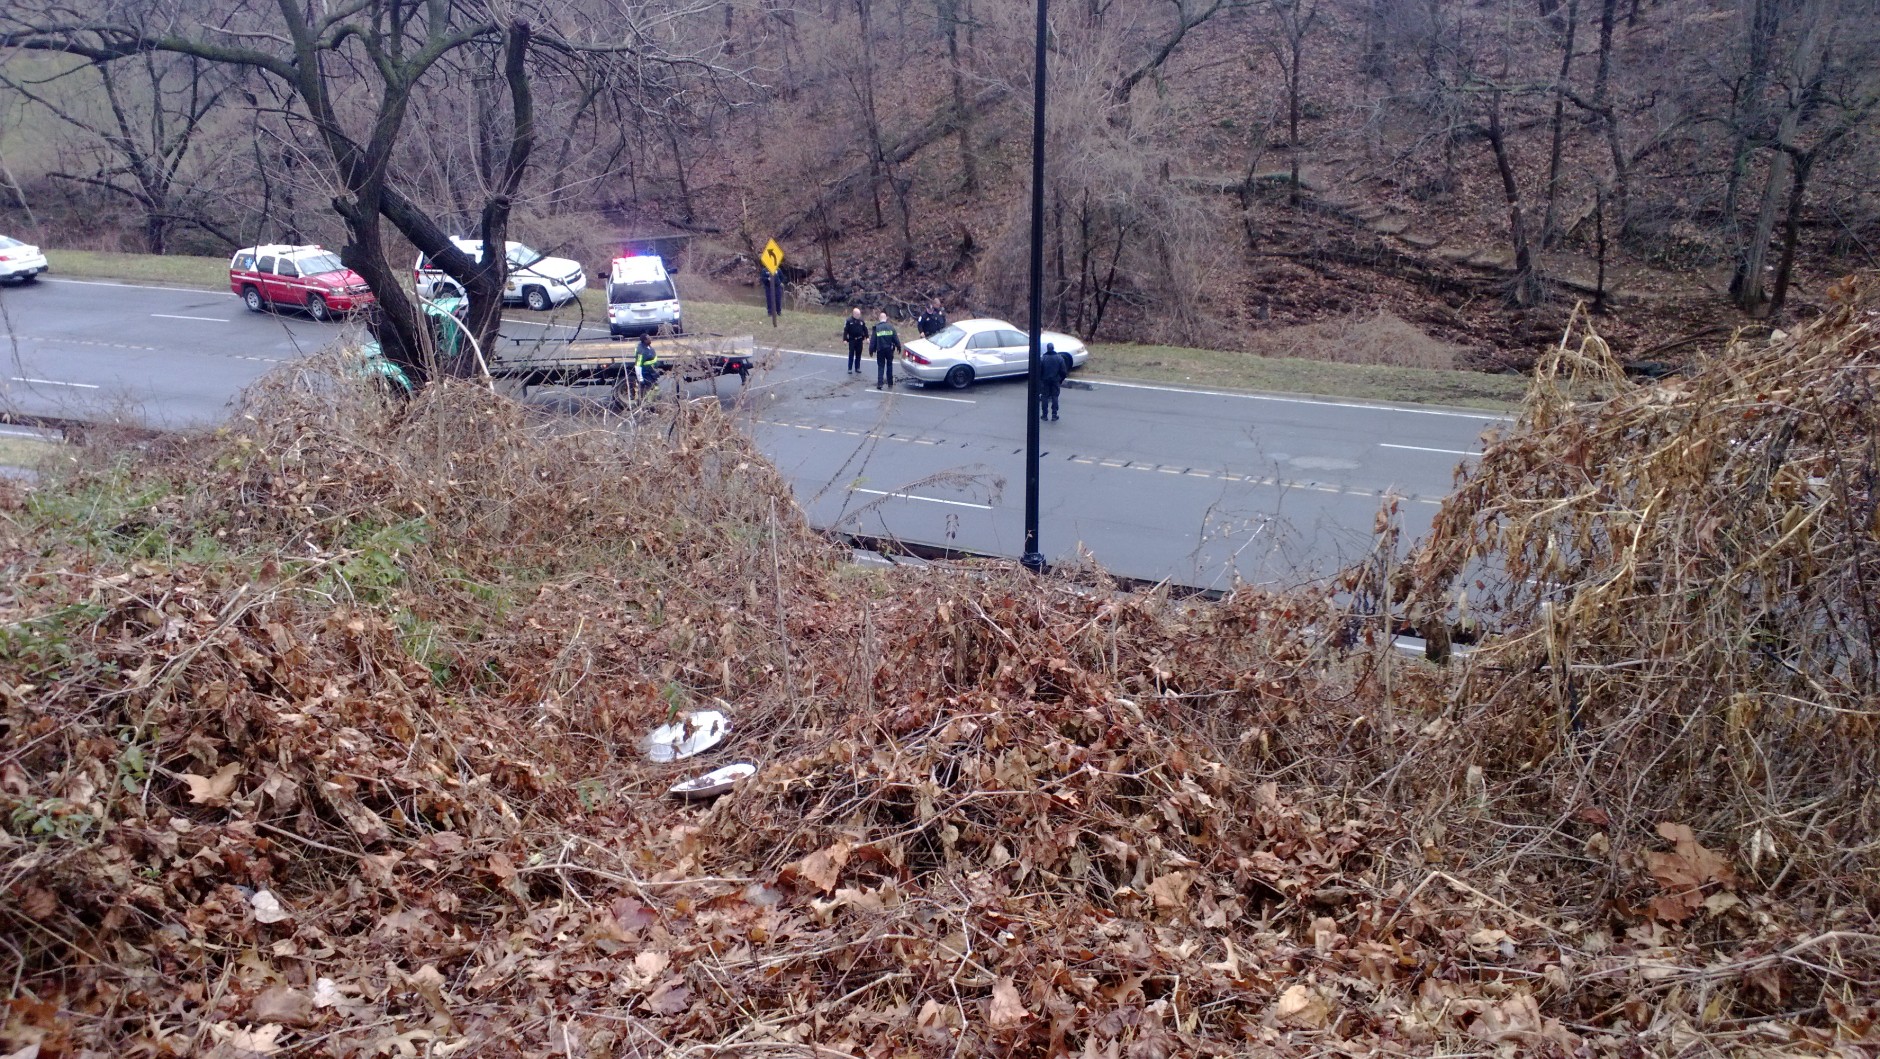 On Sunday, a motorist drove her vehicle off Rock Creek Parkway and into shallow water. She was taken to a local hospital for observation. (WTOP/Dennis Foley)